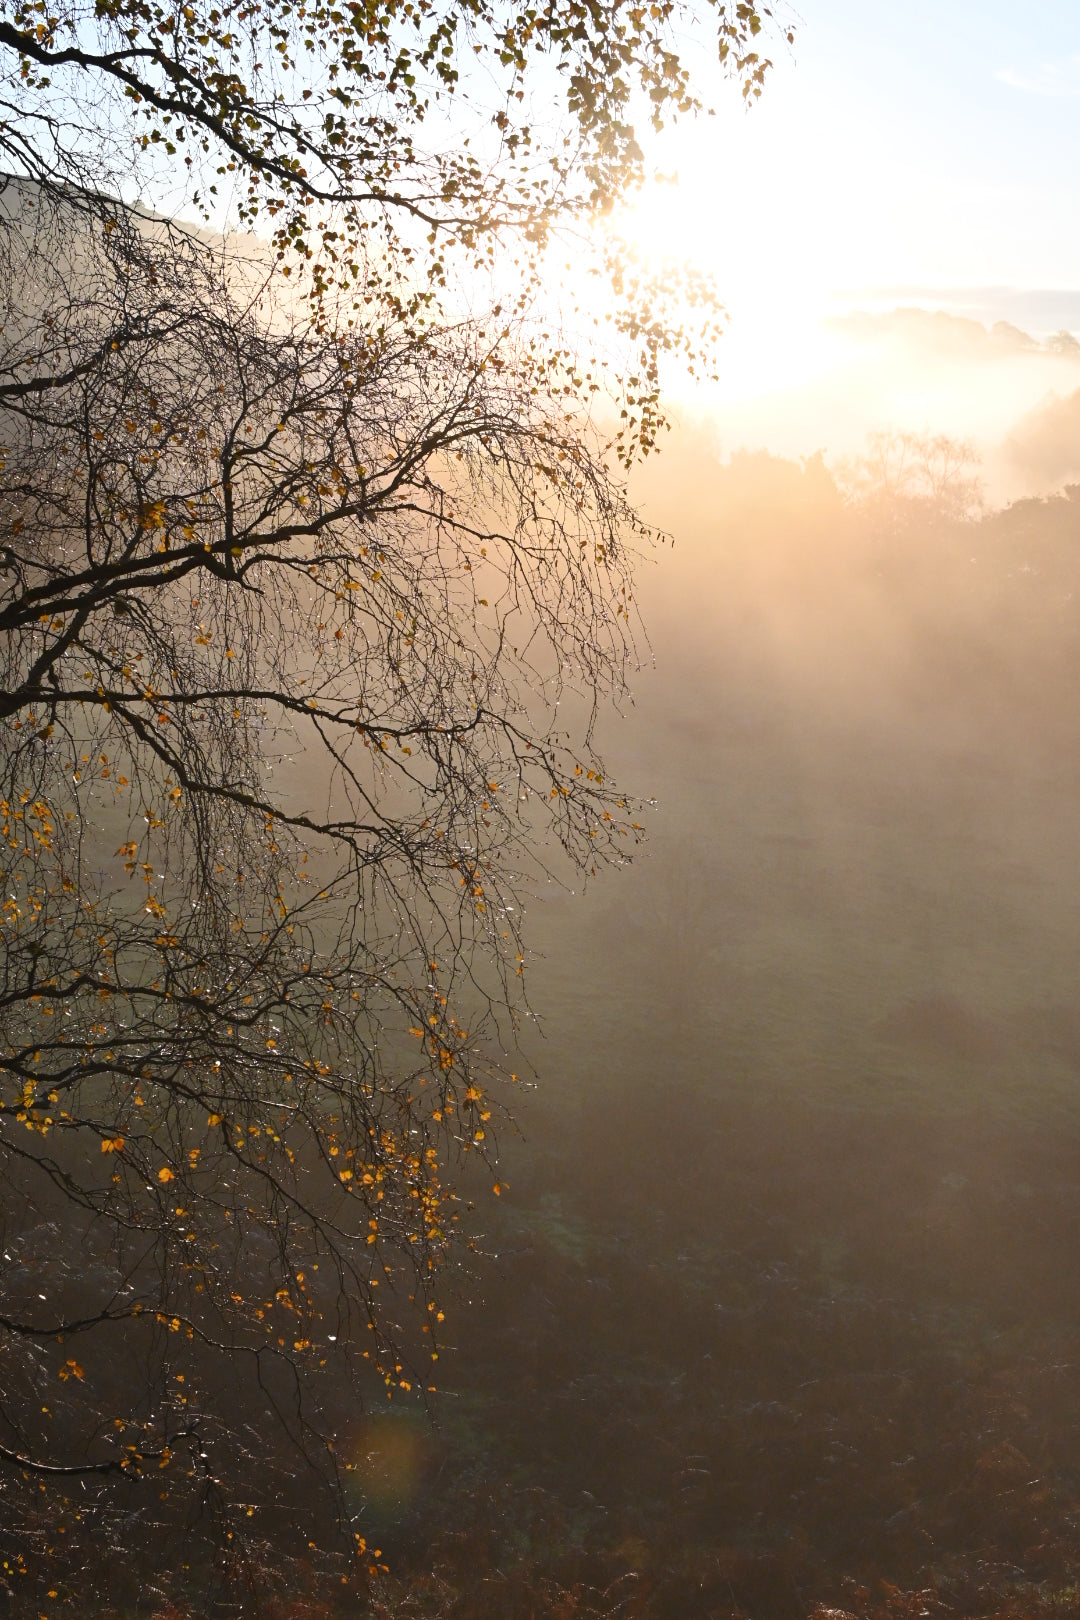 morning mist and sunlight through the beech trees